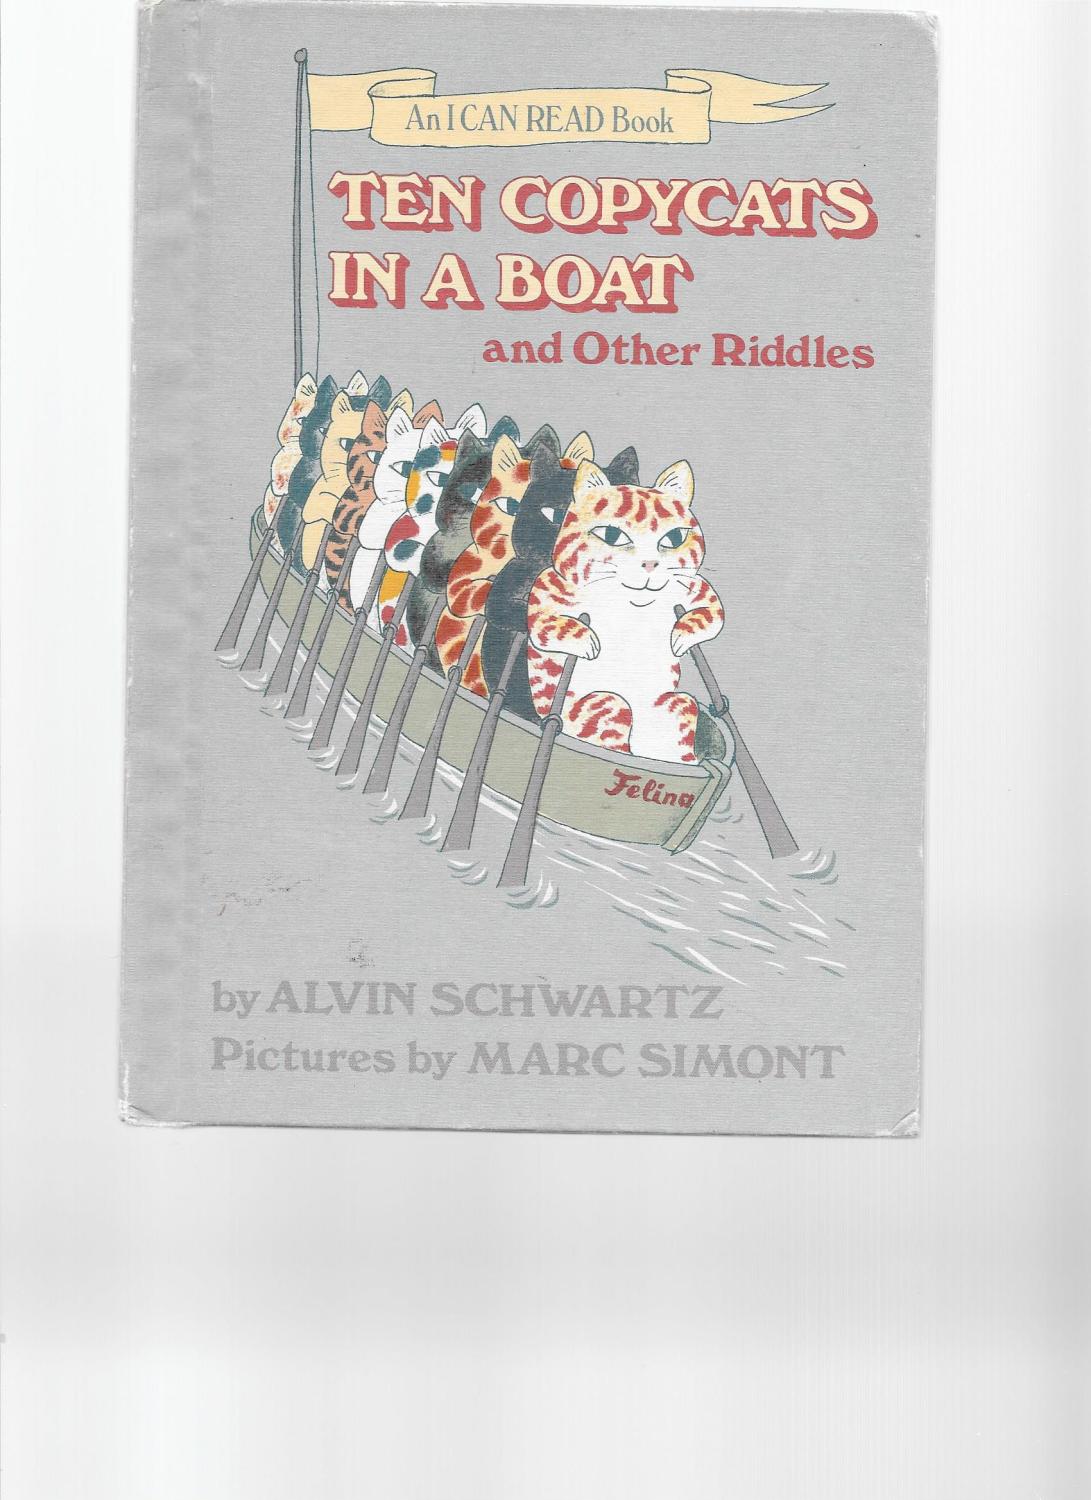 Ten Copycats in a Boat, and Other Riddles (I Can Read Book) - Alvin Schwartz